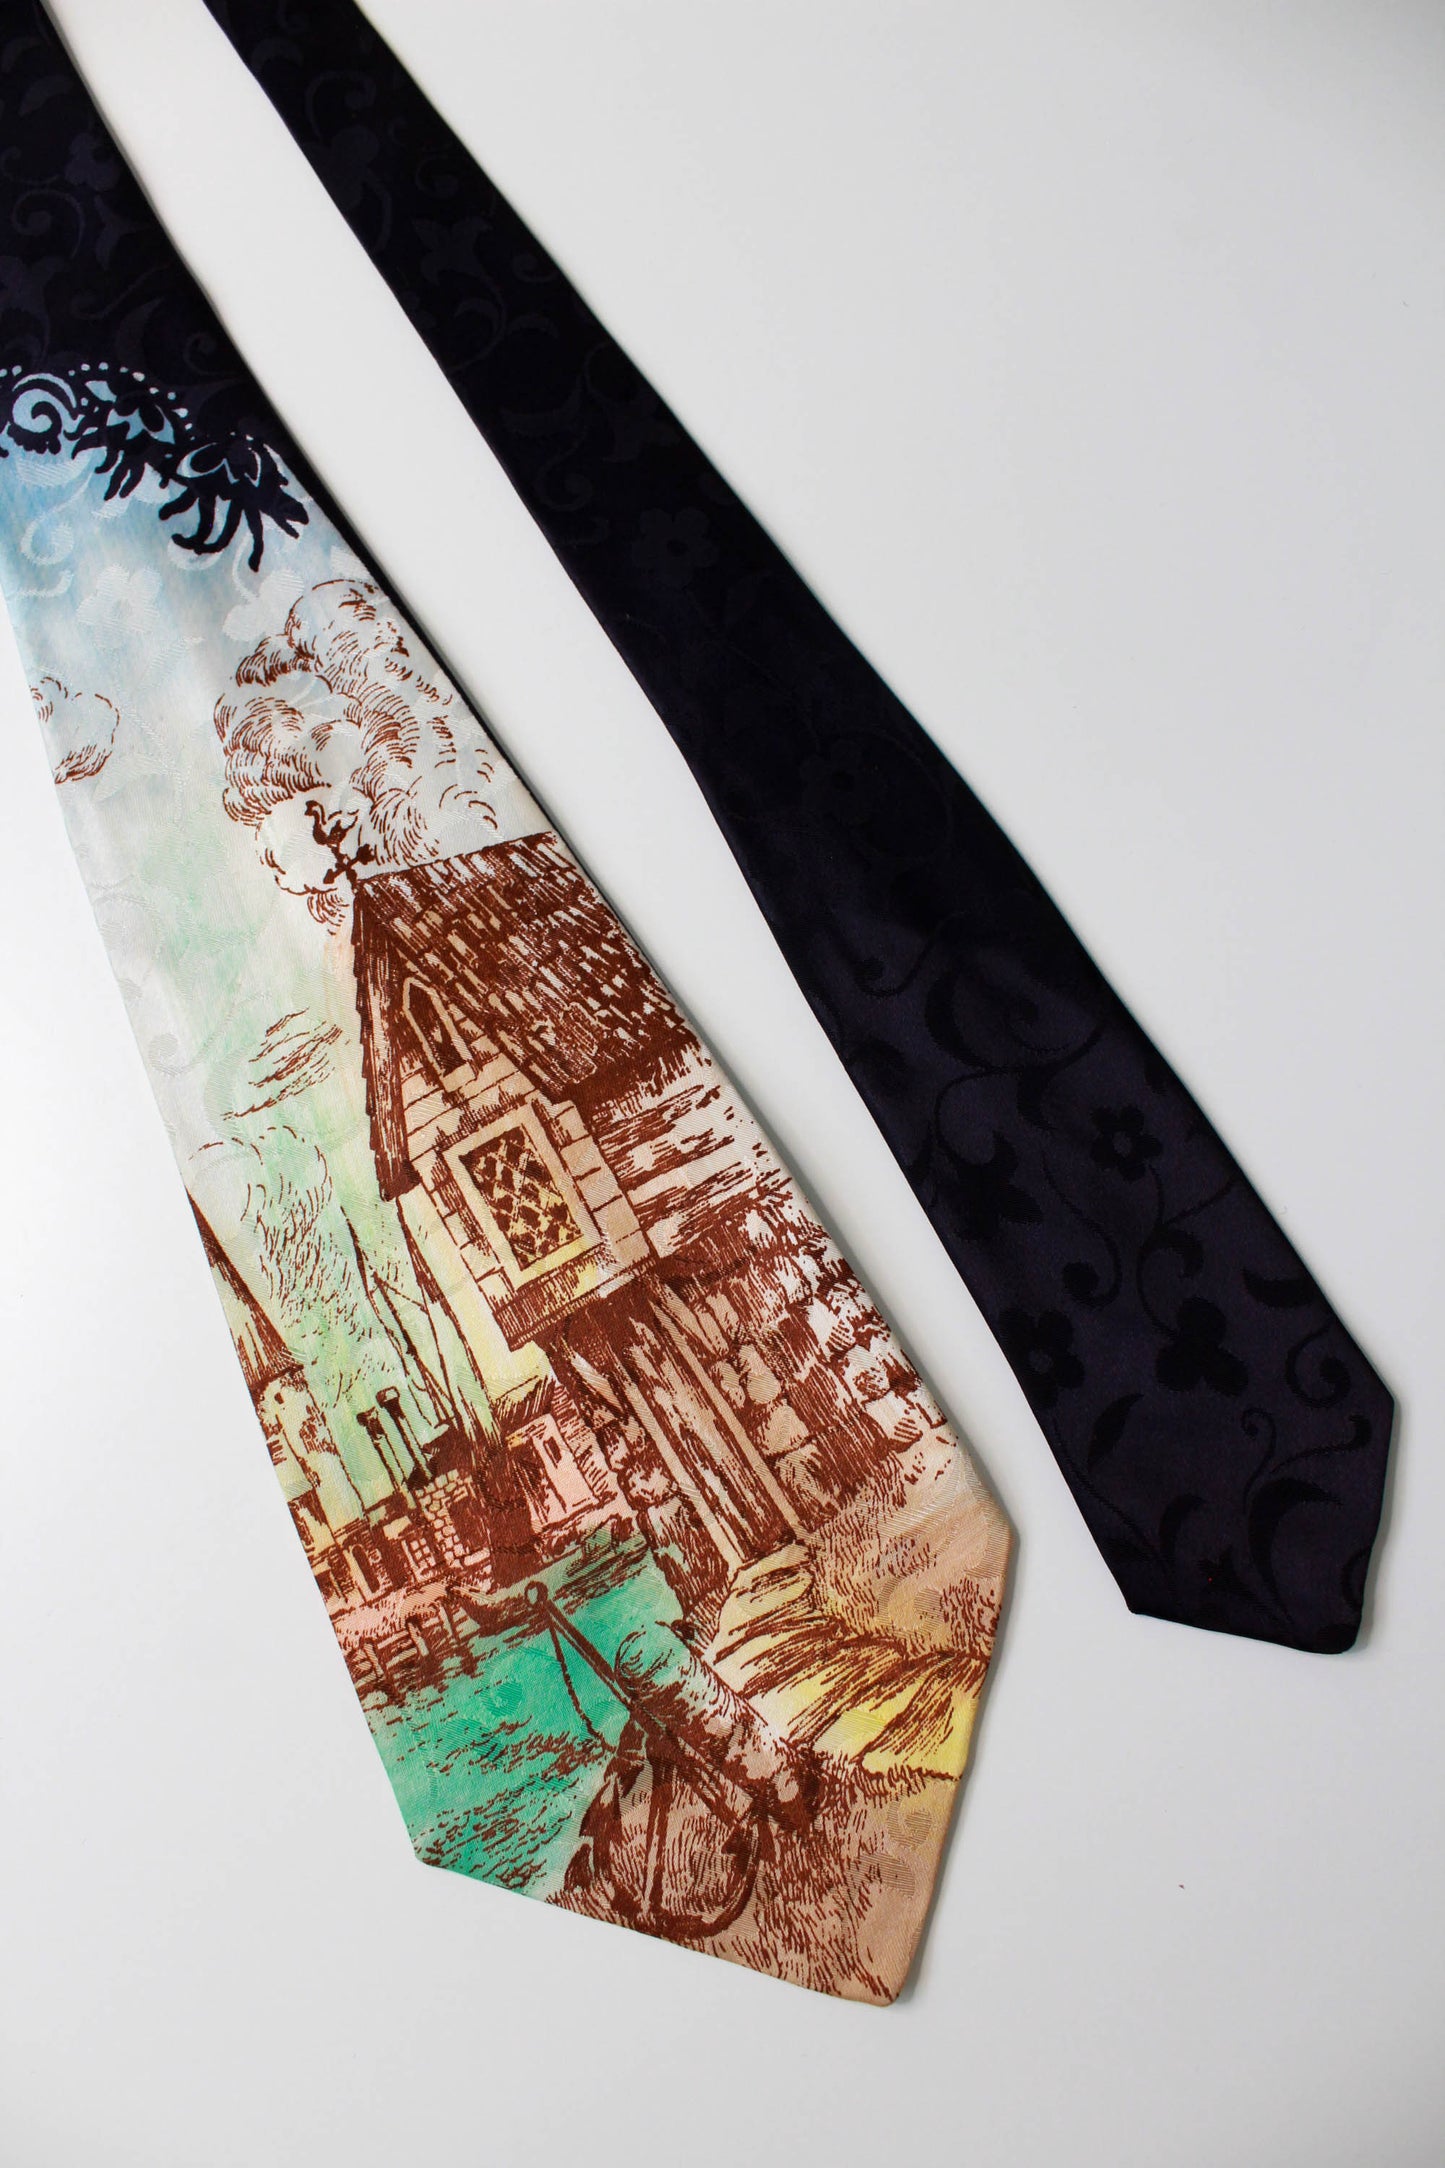 1940s rayon wide swing tie with hand painted house illustration, delmar creation vintage tie jacquard